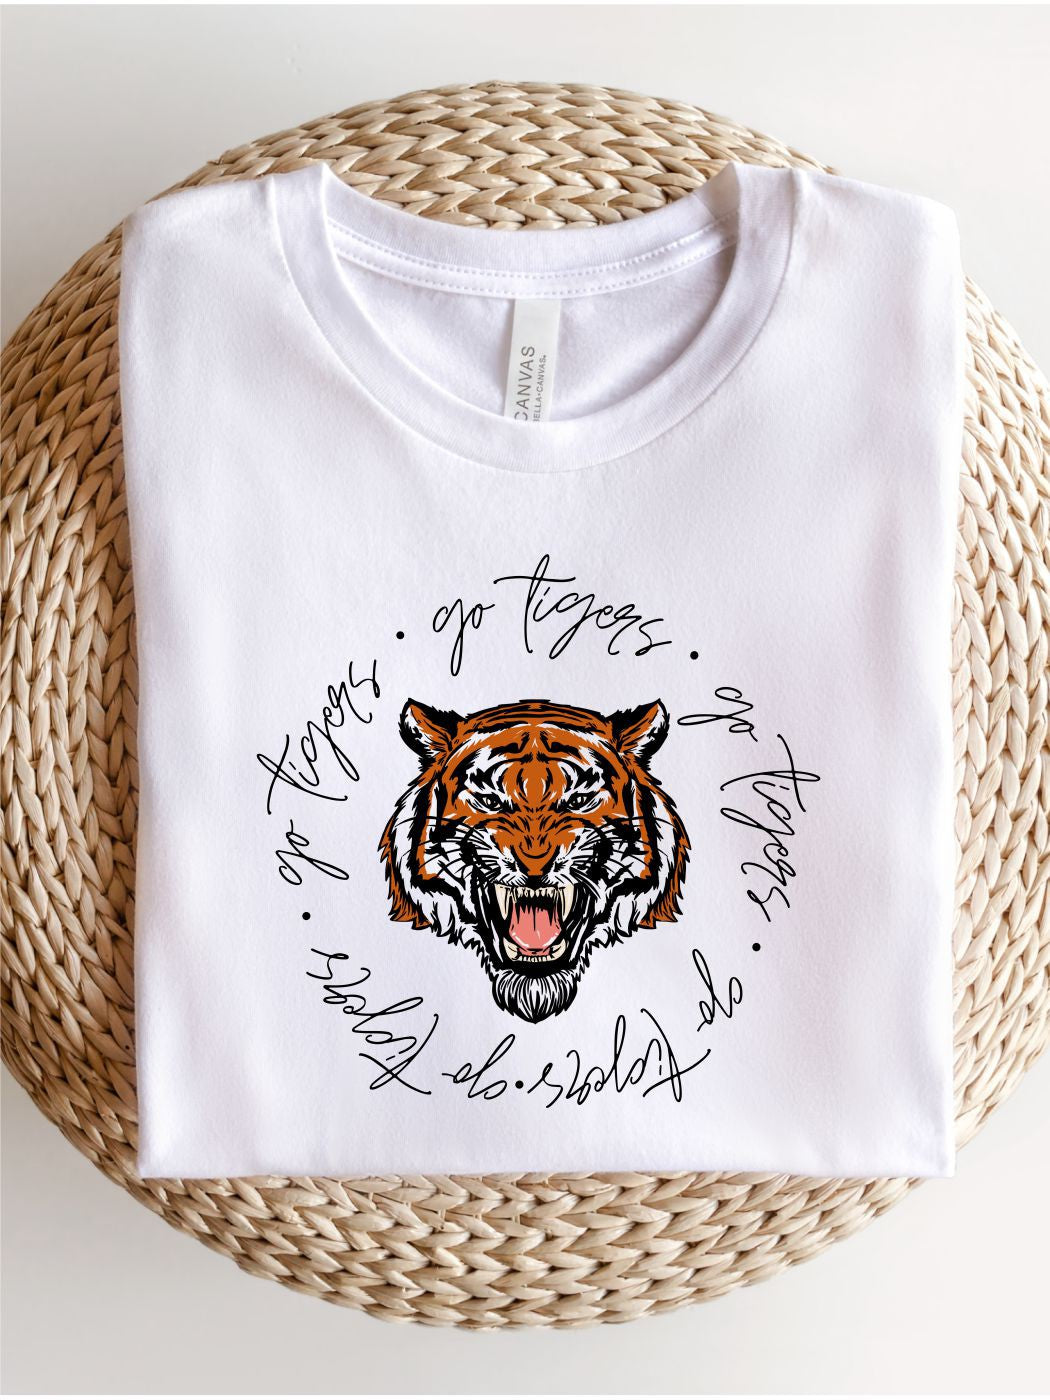 Go Tigers Graphic Tee